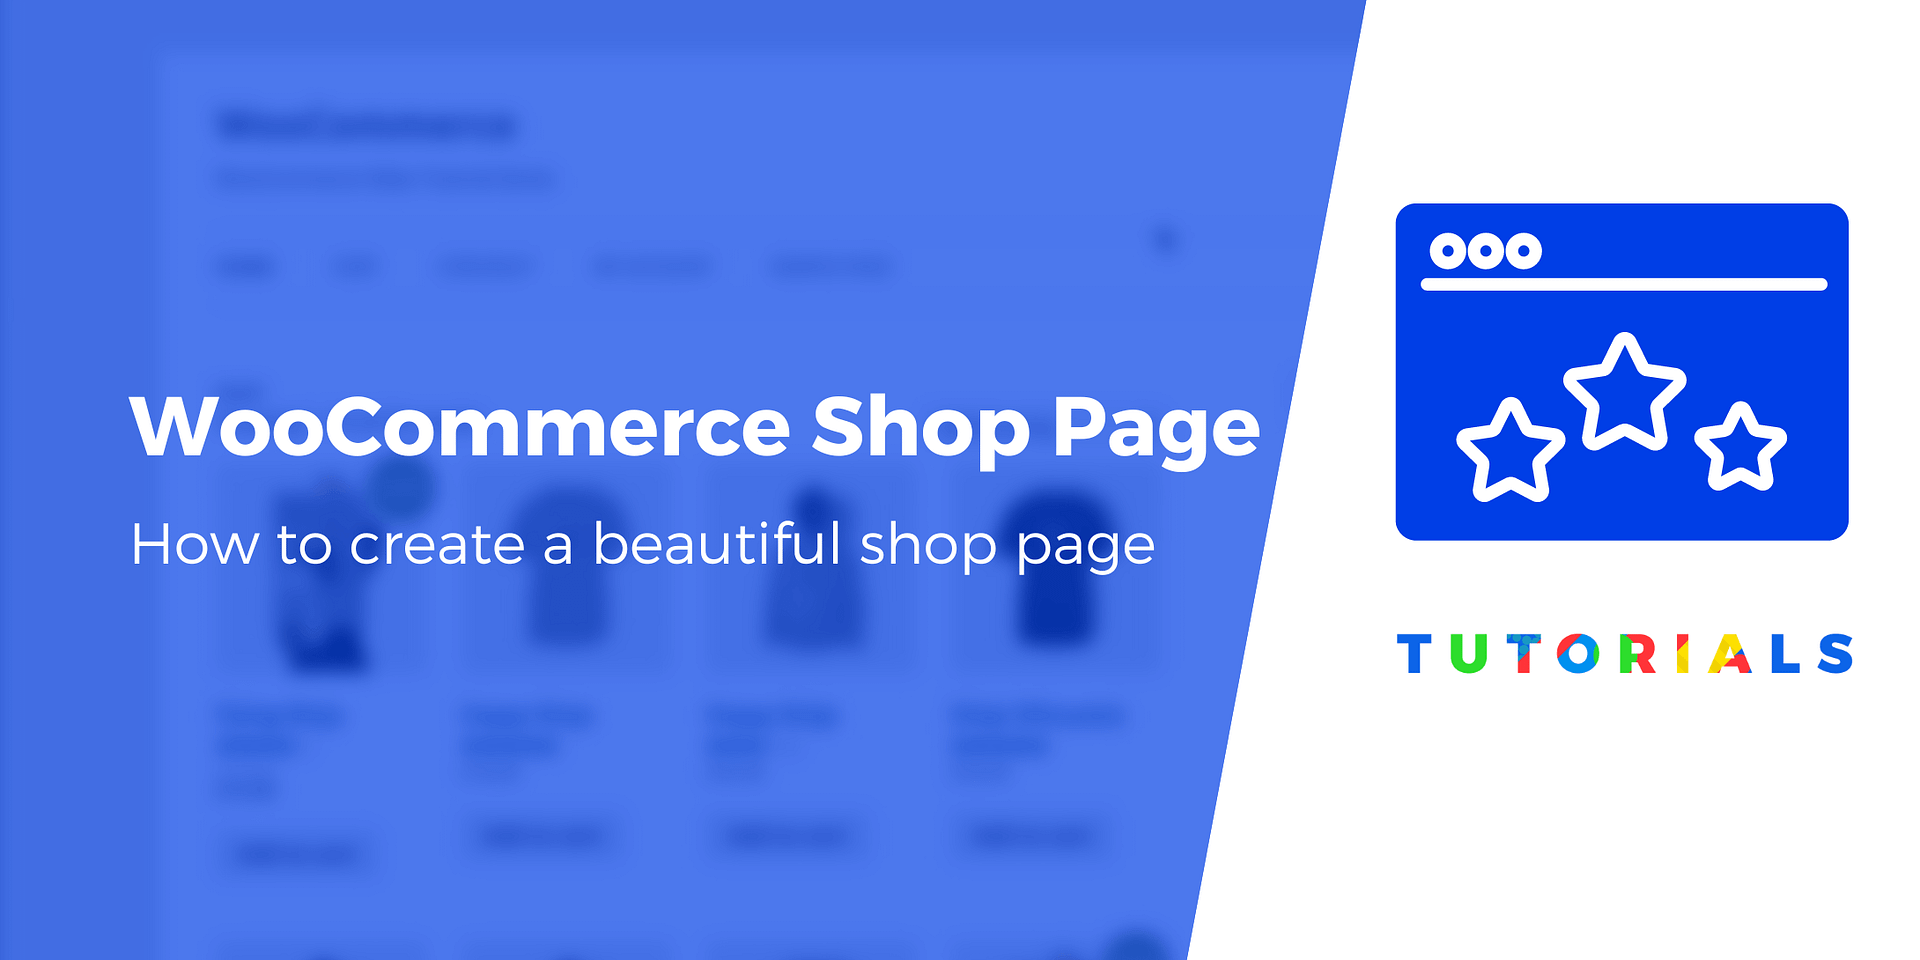 Setting up a Woocommerce shop - Step by step